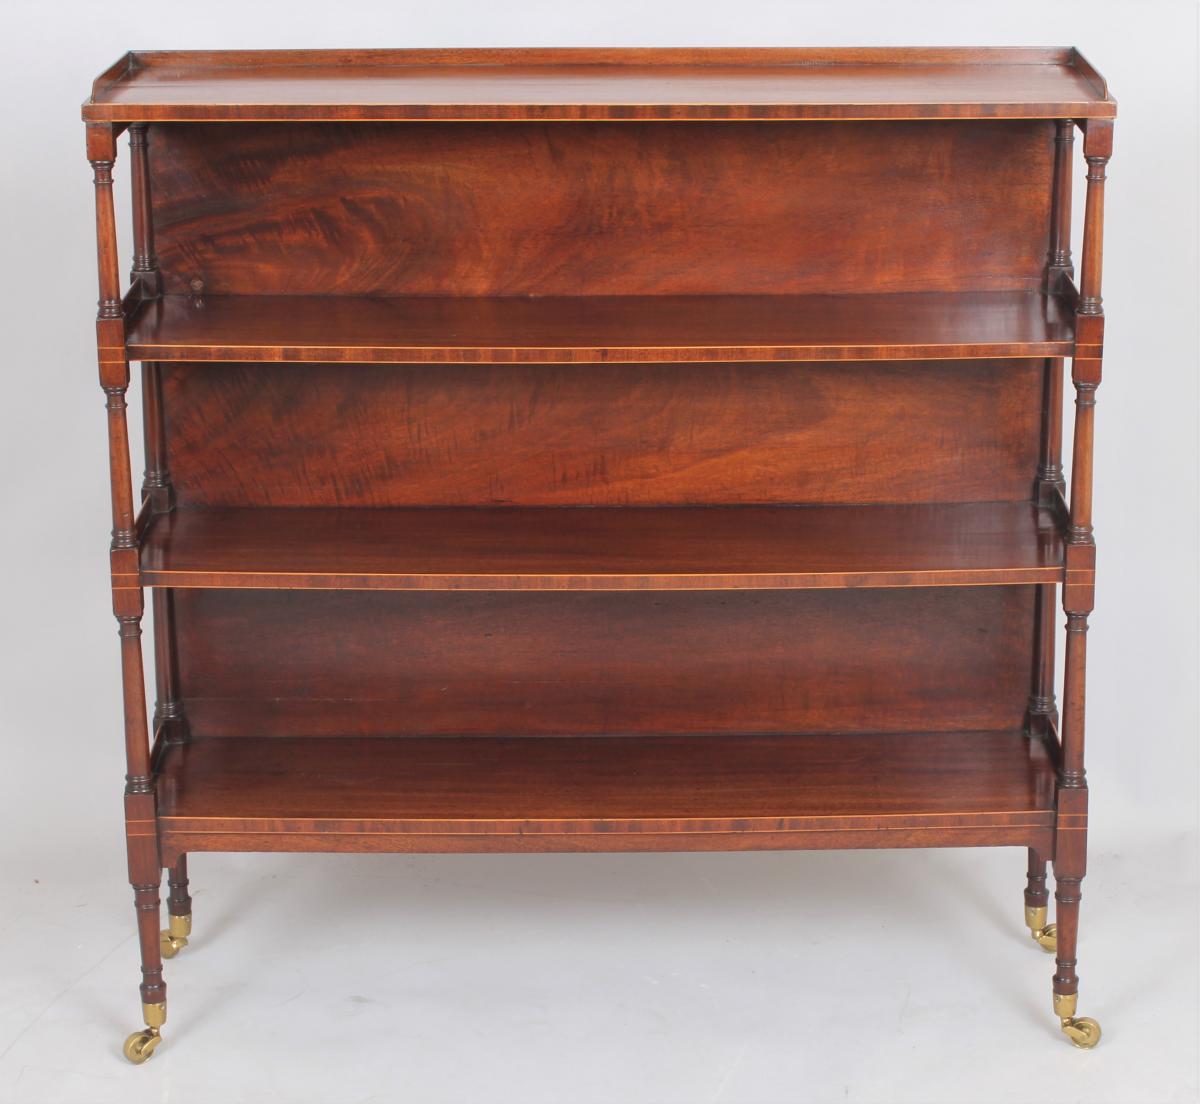 Fine George III mahogany and boxwood strung four tier open shelves